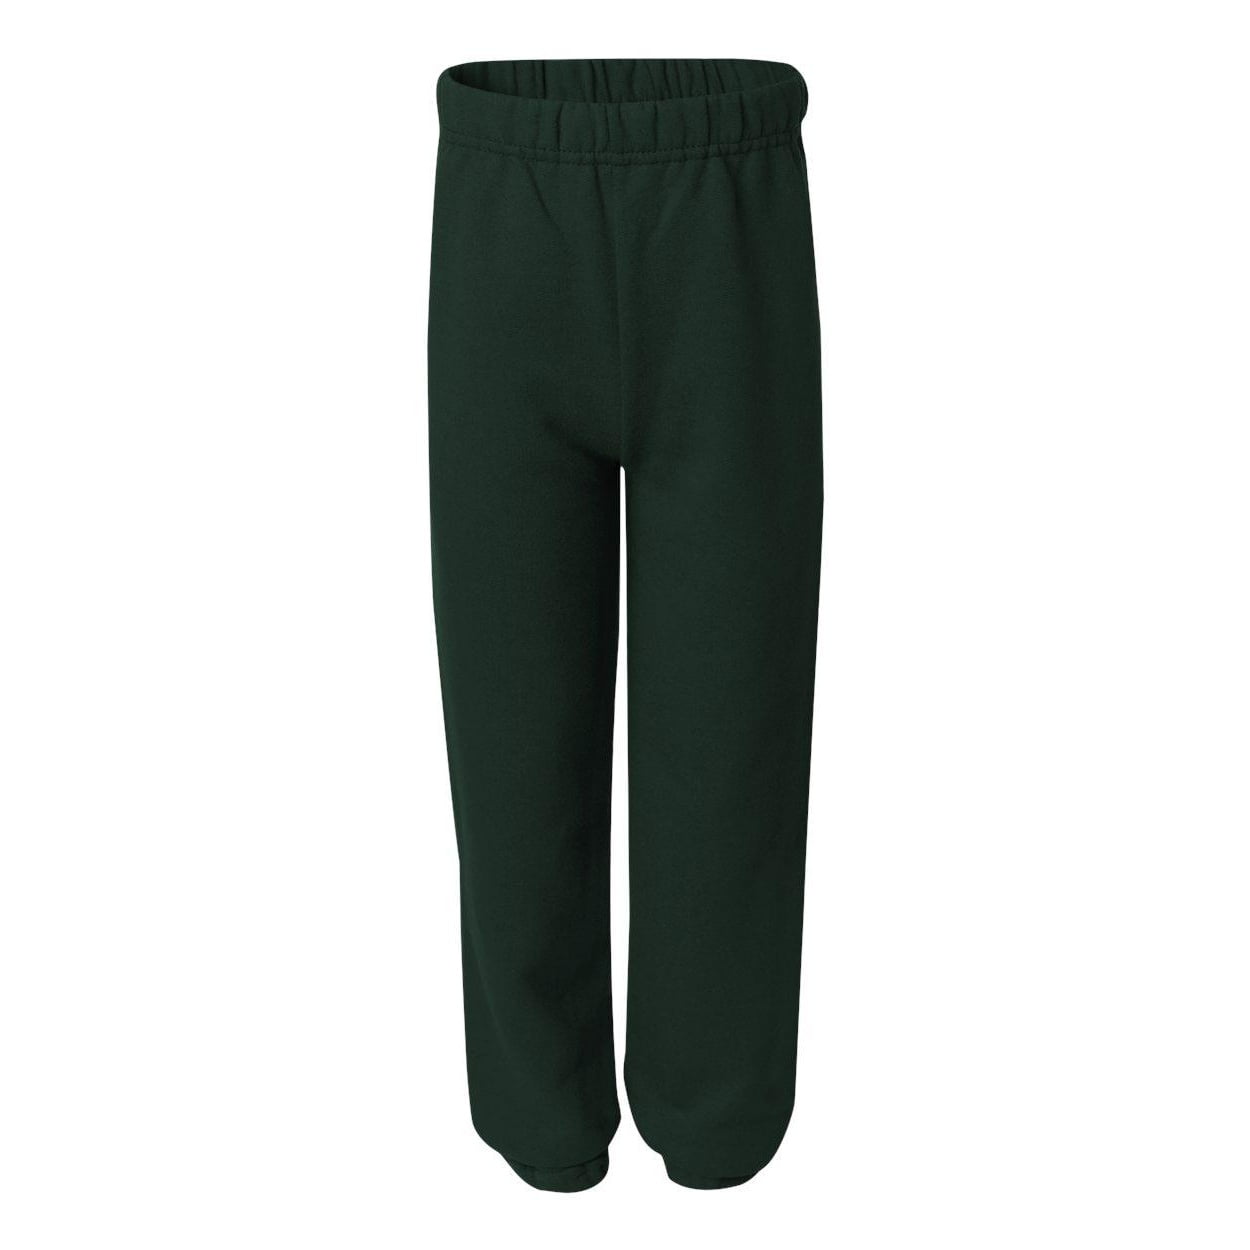 Nublend Youth Sweatpants (Forest Green) (XL)